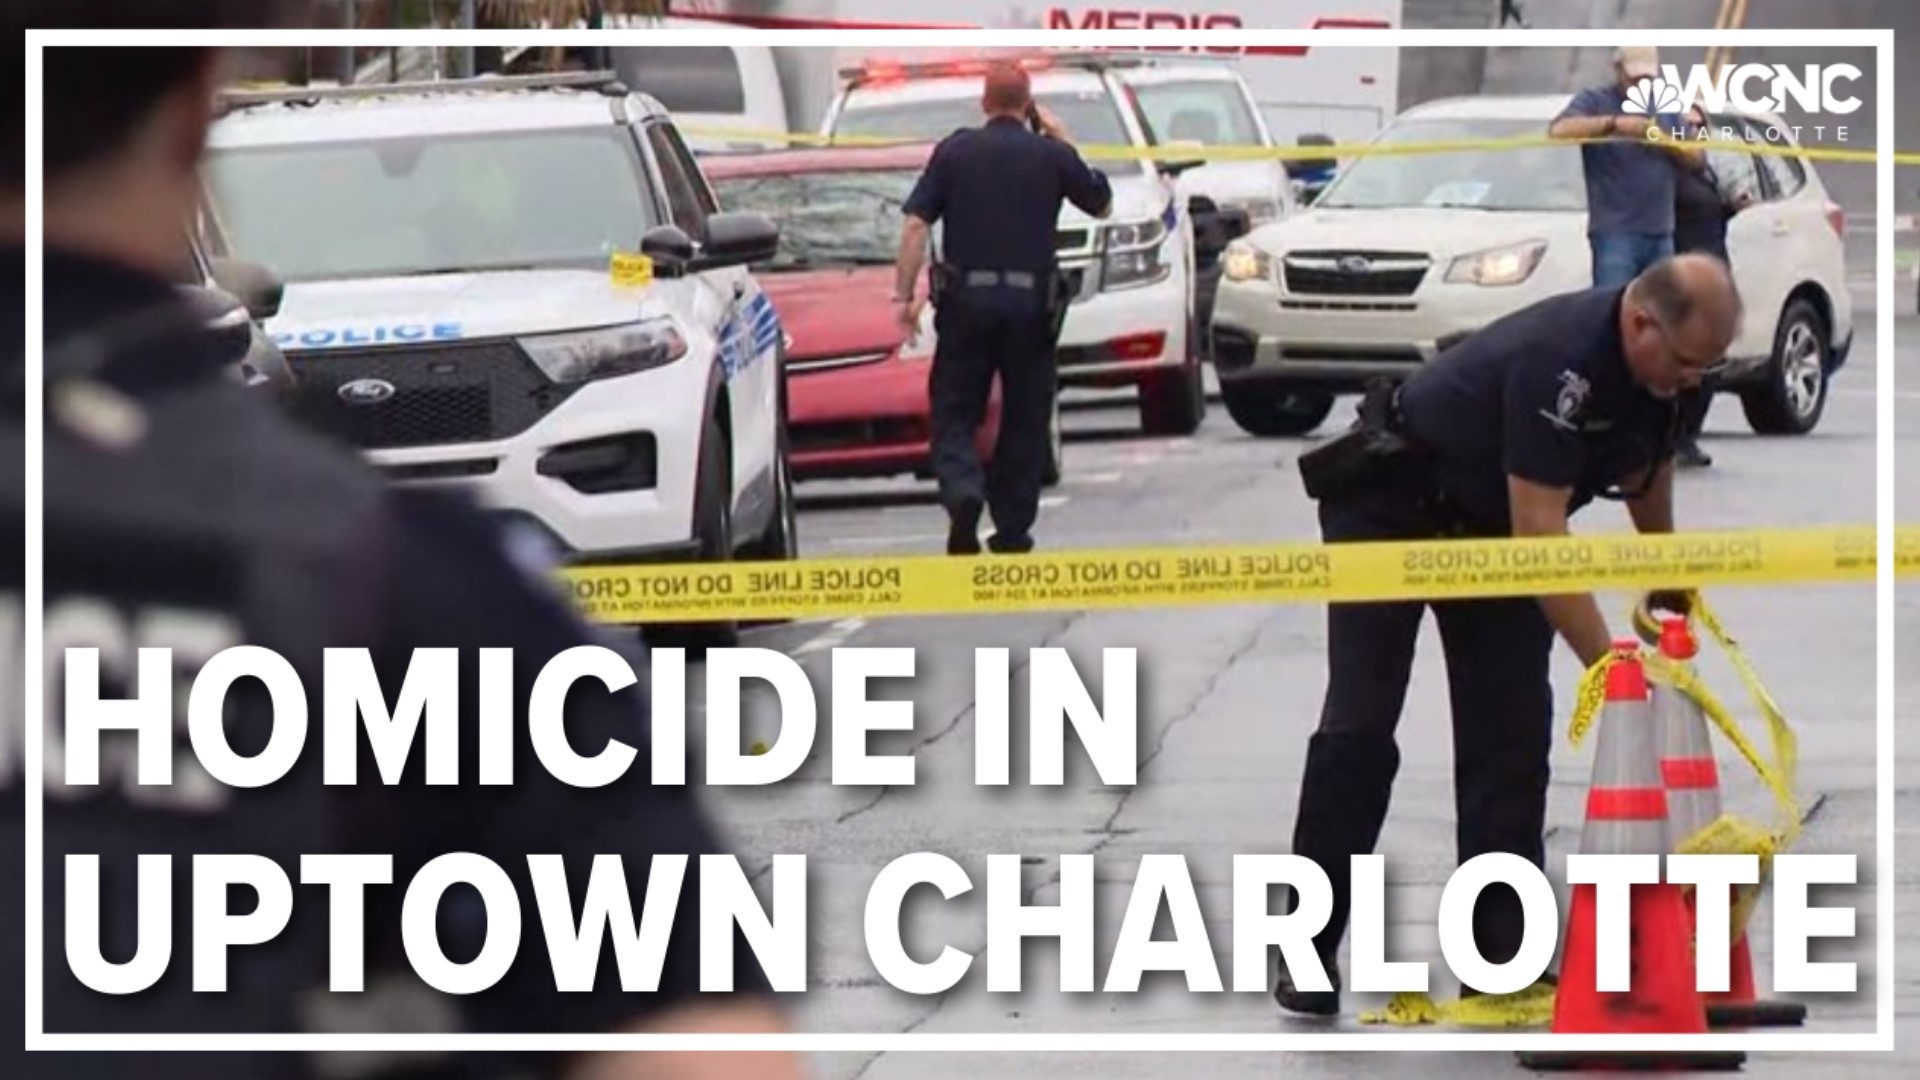 One person has been arrested after a deadly shooting in Uptown Charlotte's Fourth Ward neighborhood Friday morning.